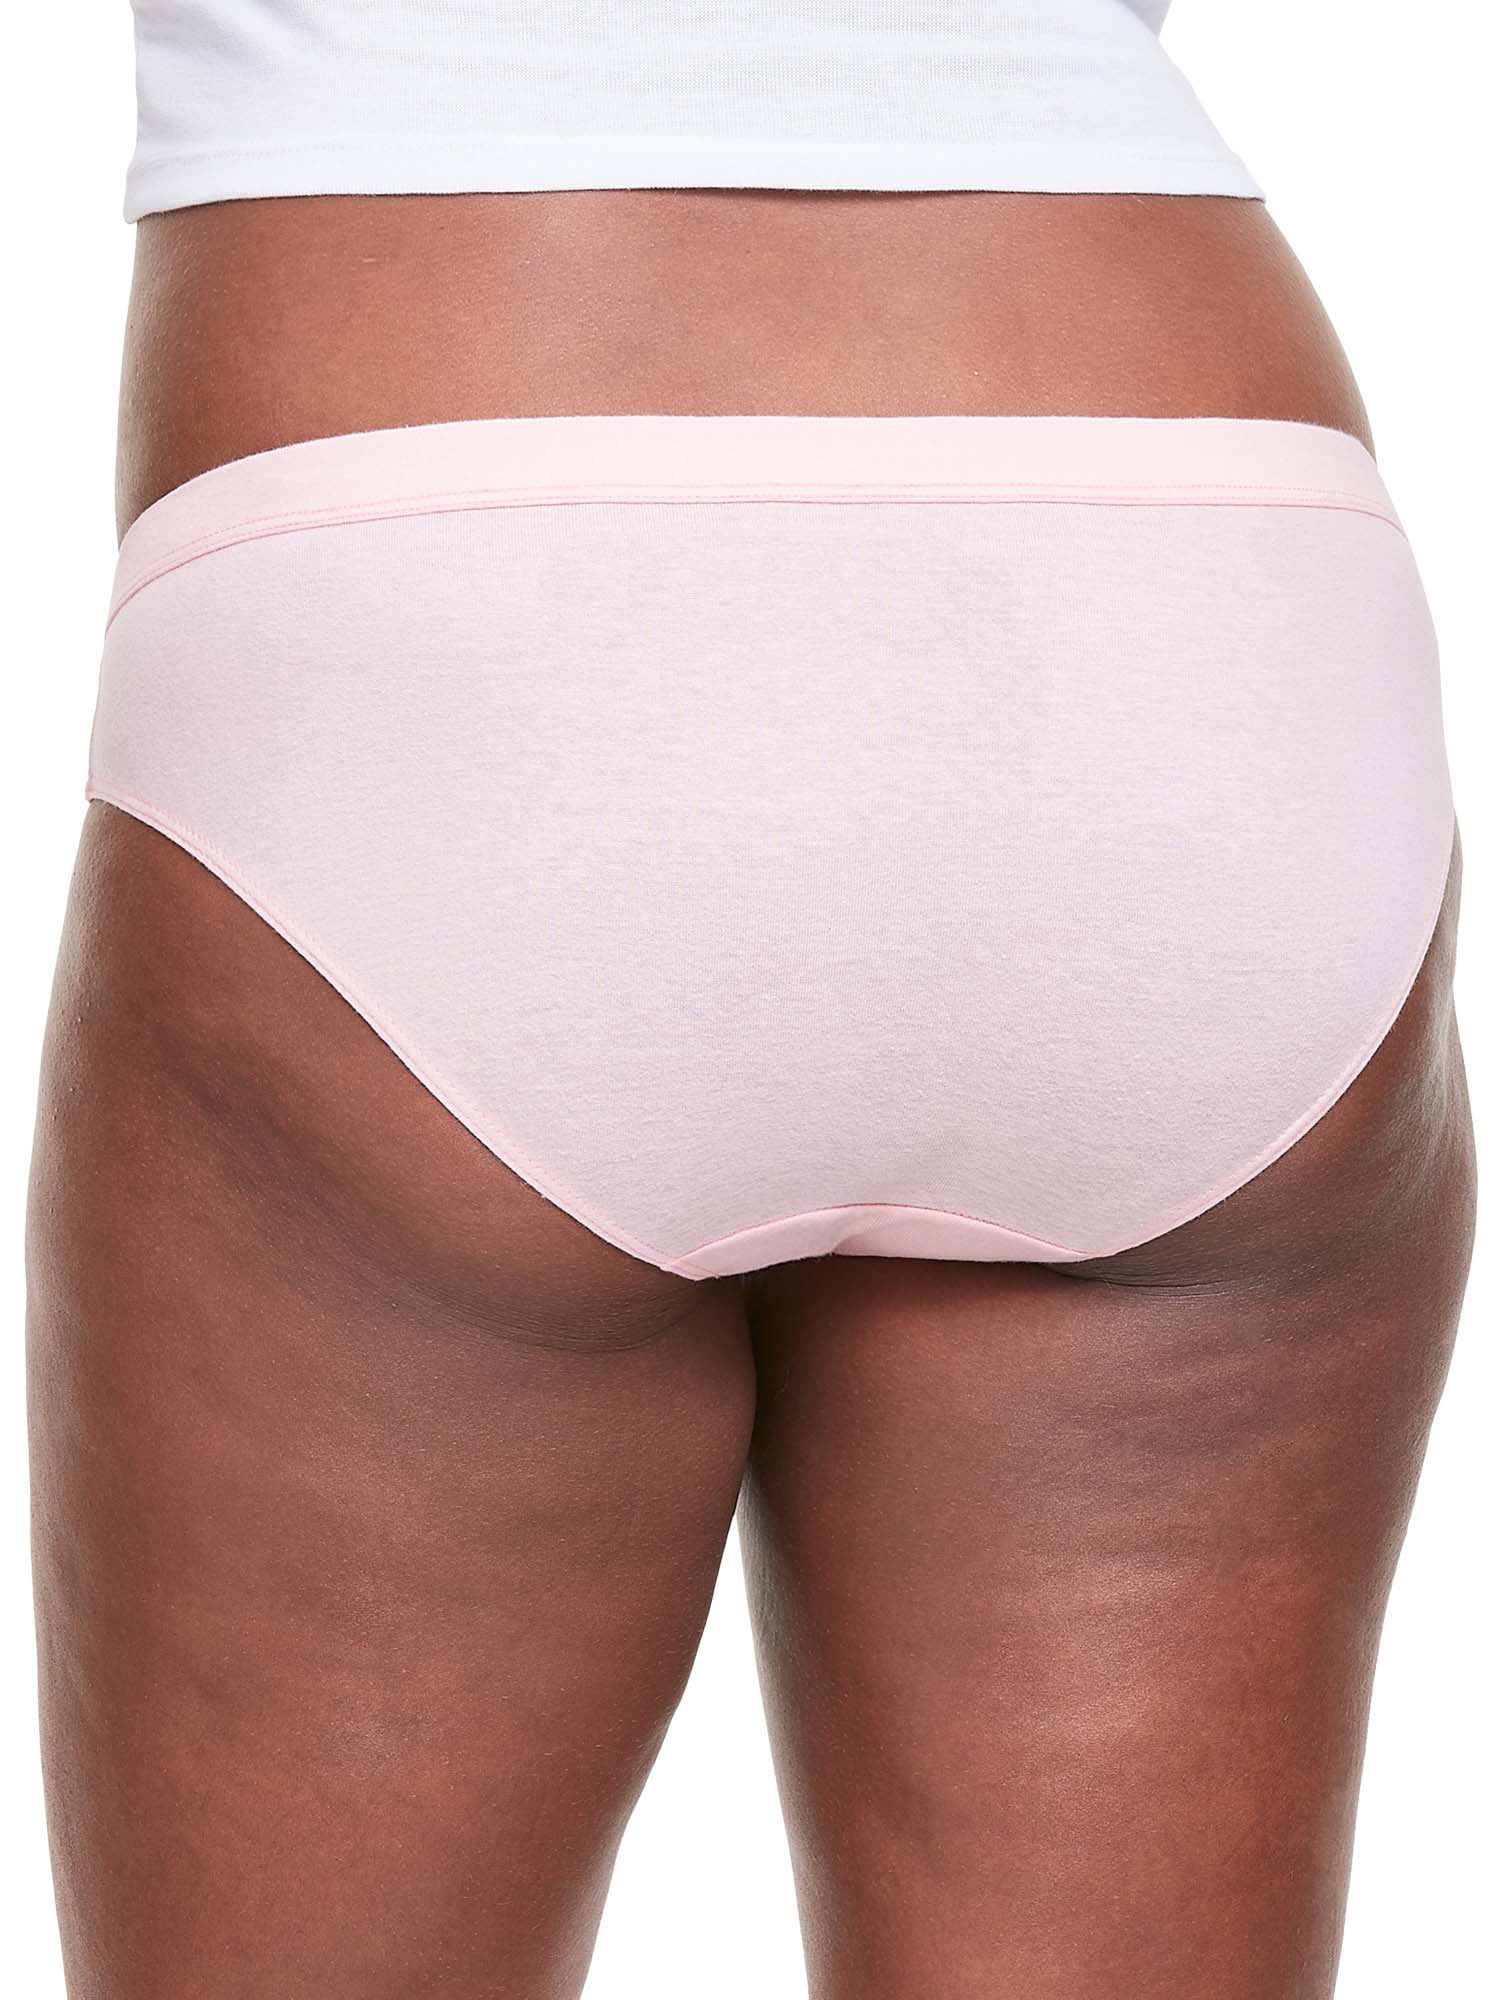 Buy Cotton Hipster Panties for Women Pack of 3, Full Coverage, Grip fit  with Antimicrobial & Stain Release Technology